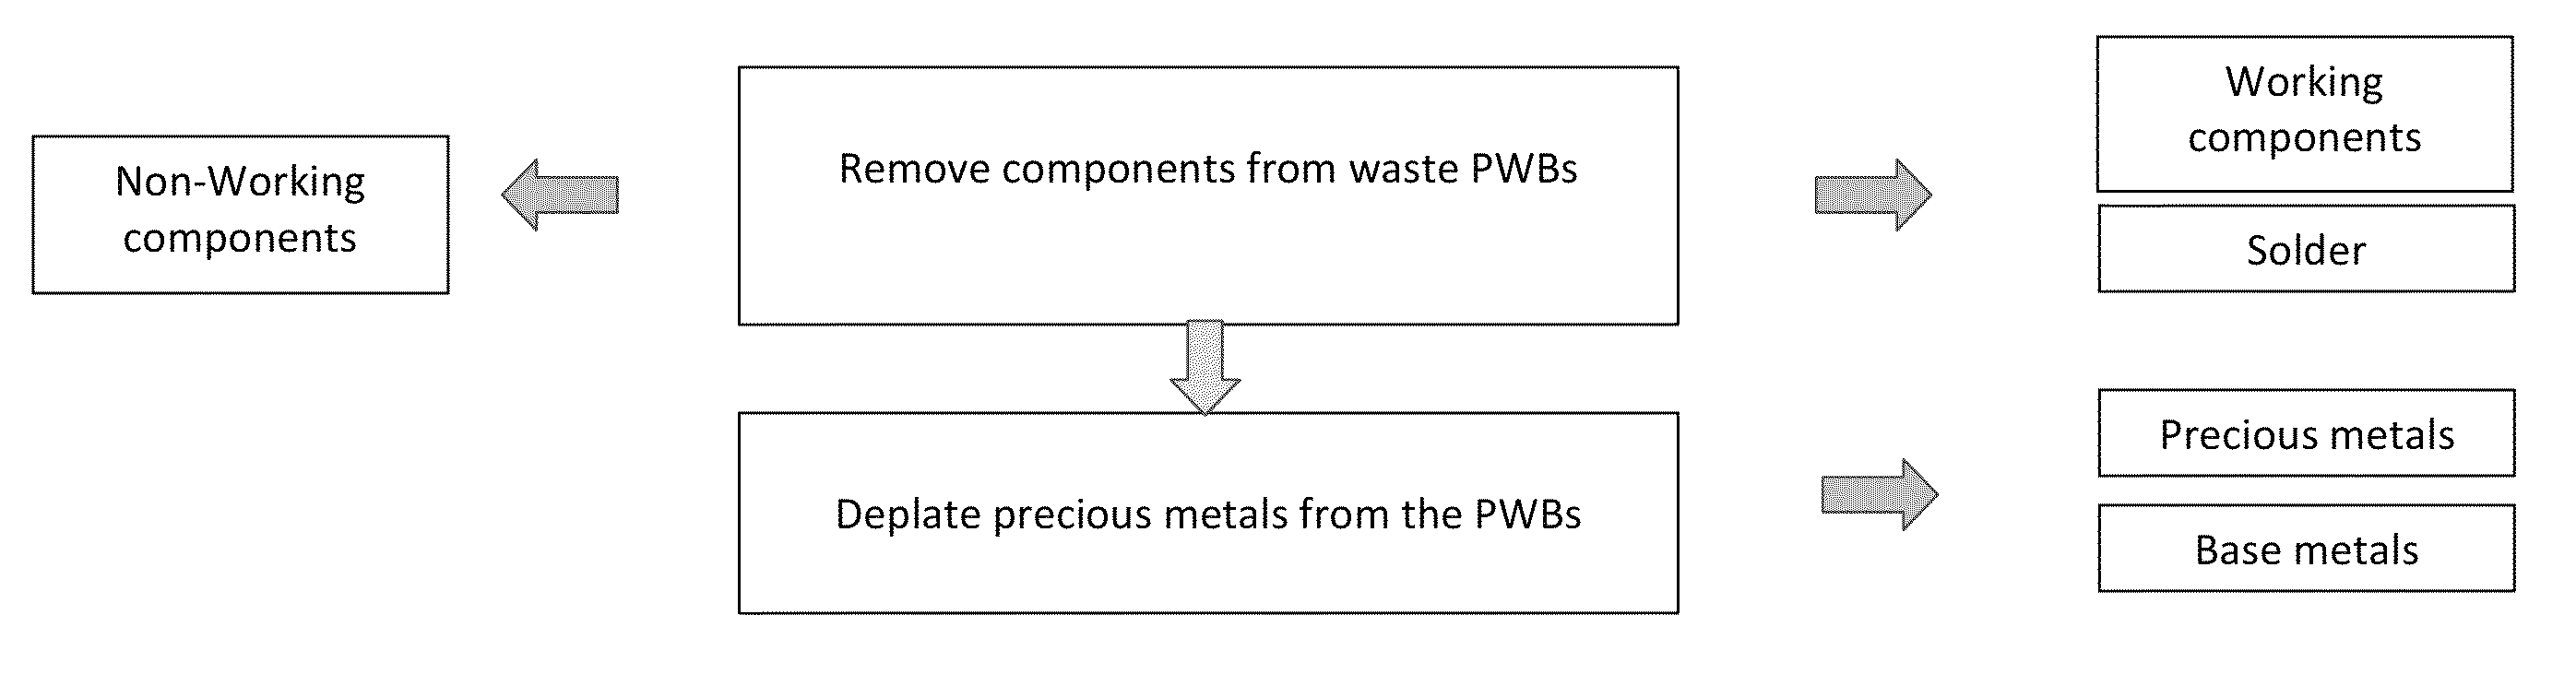 Method for recycling of obsolete printed circuit boards